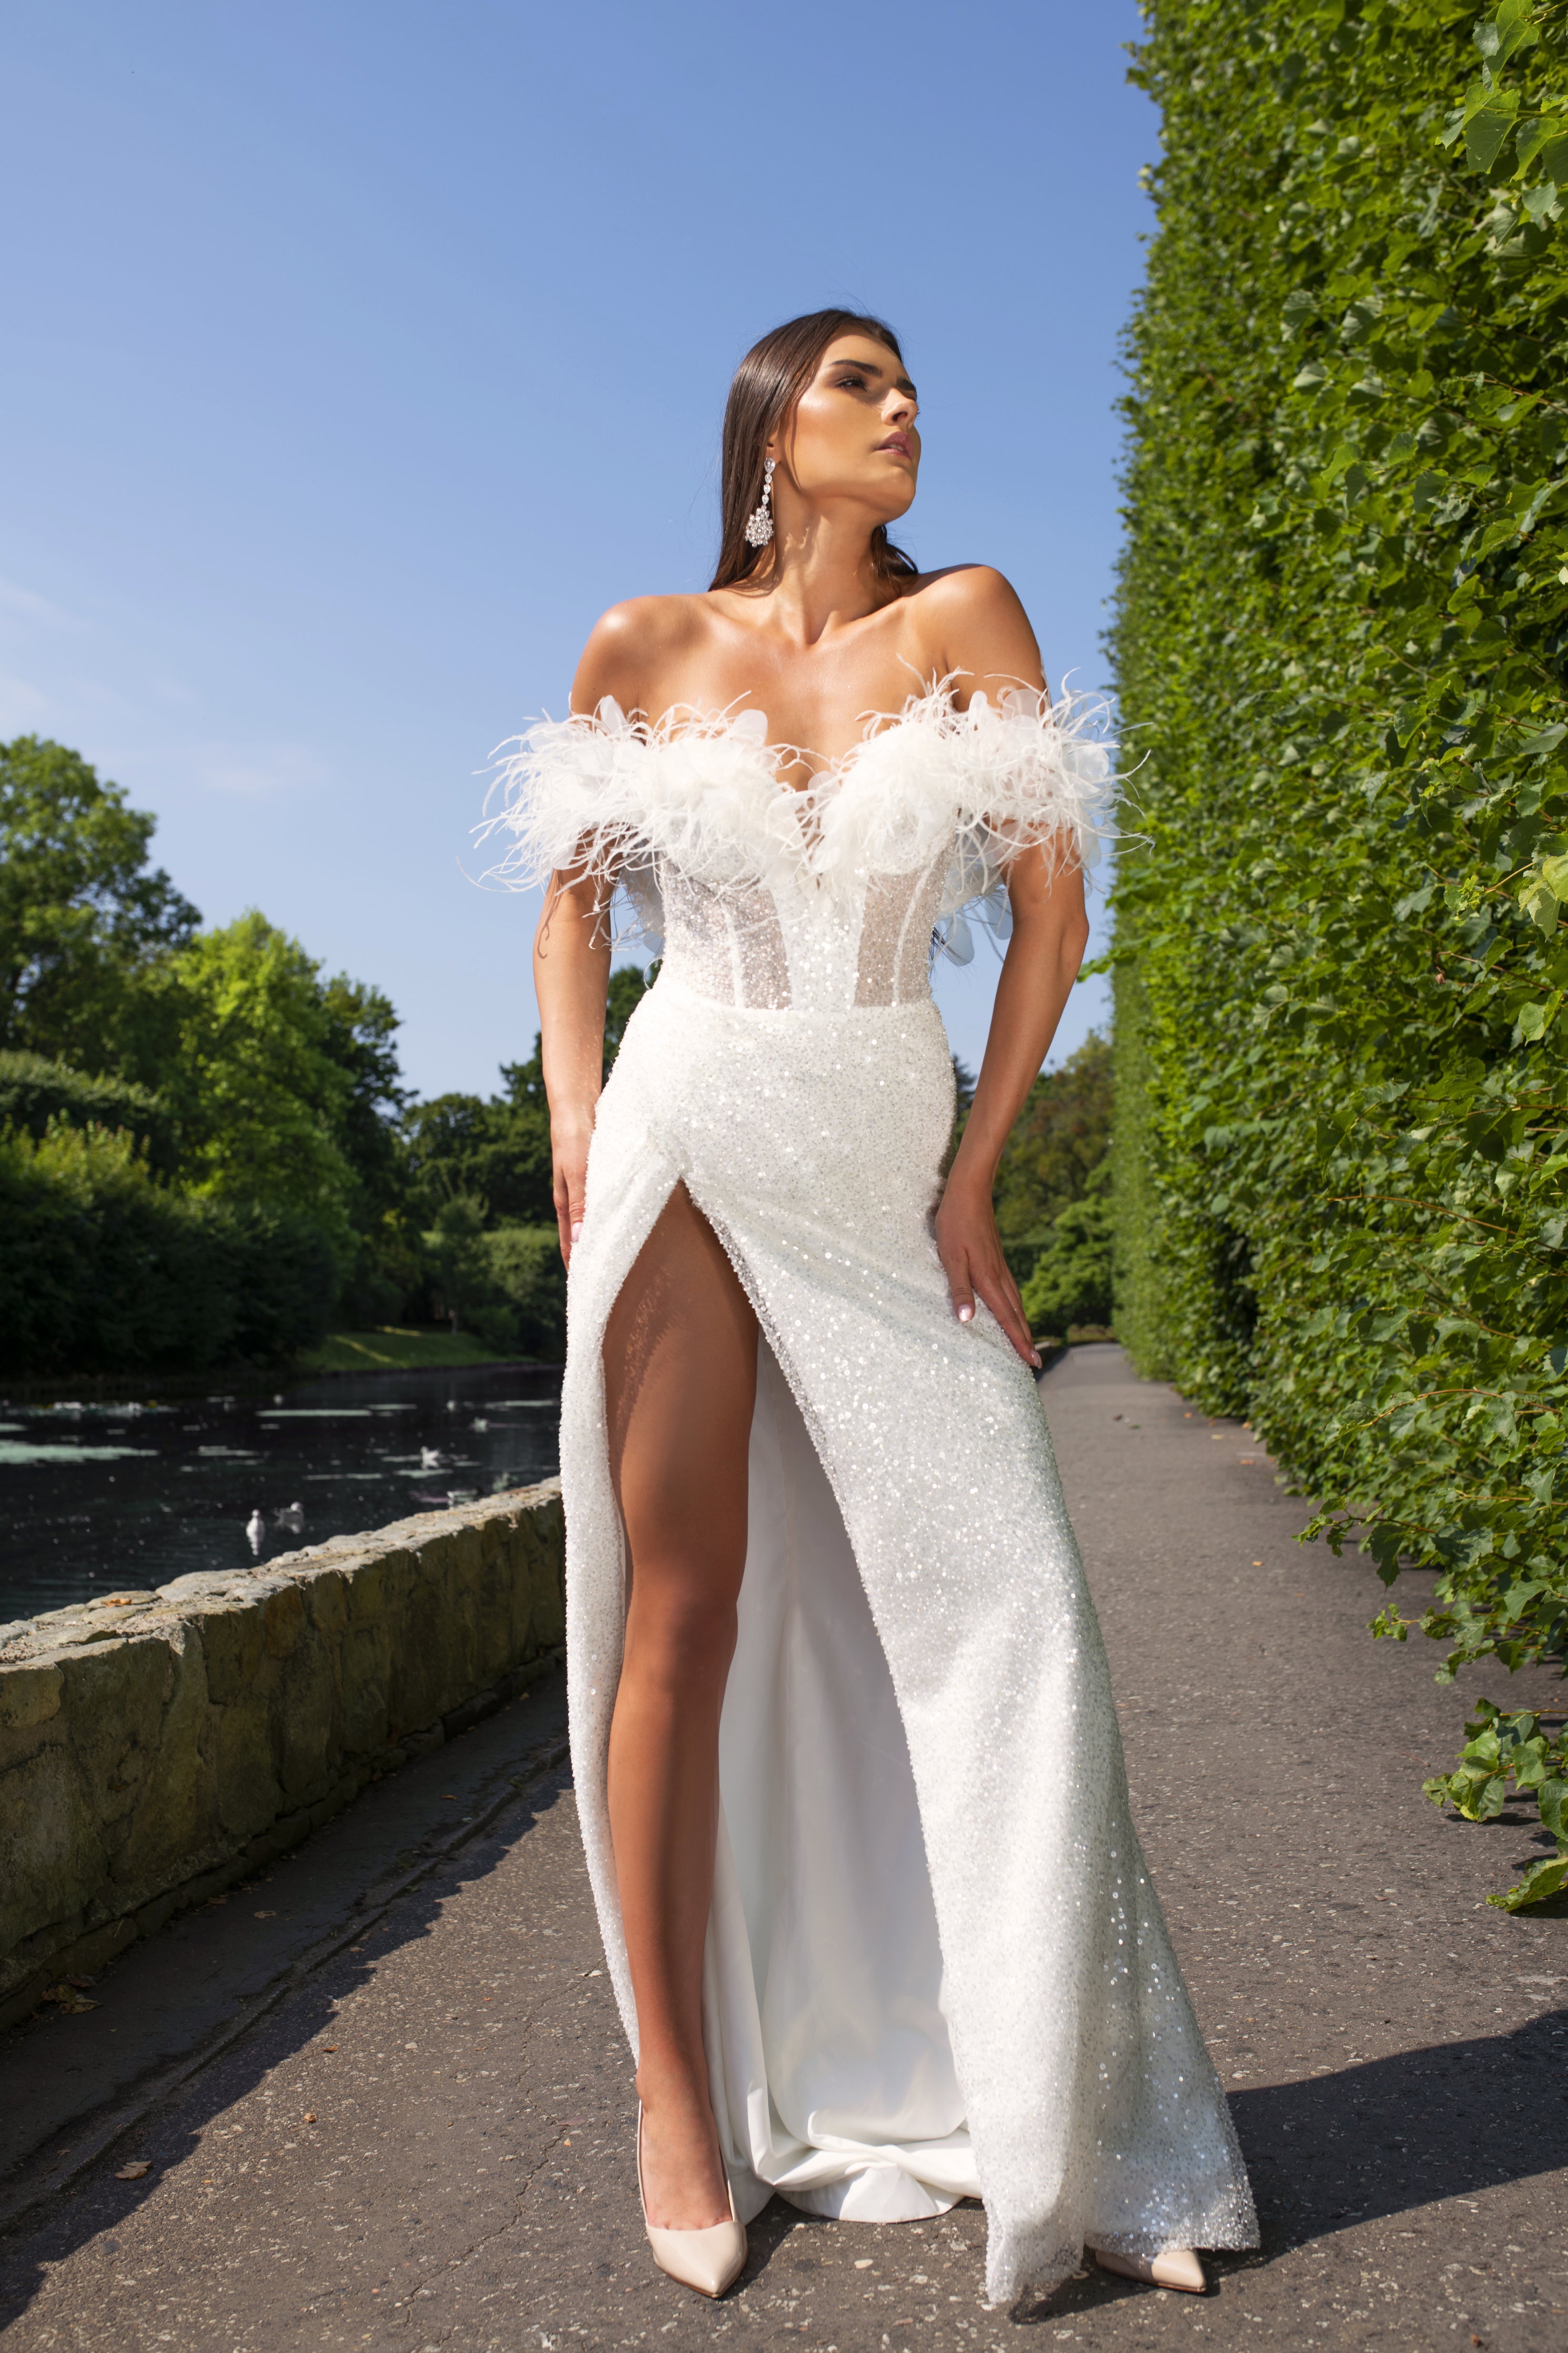 Dominique - Glam Convertible Wedding Dress with Sweetheart Neckline - Maxima Bridal